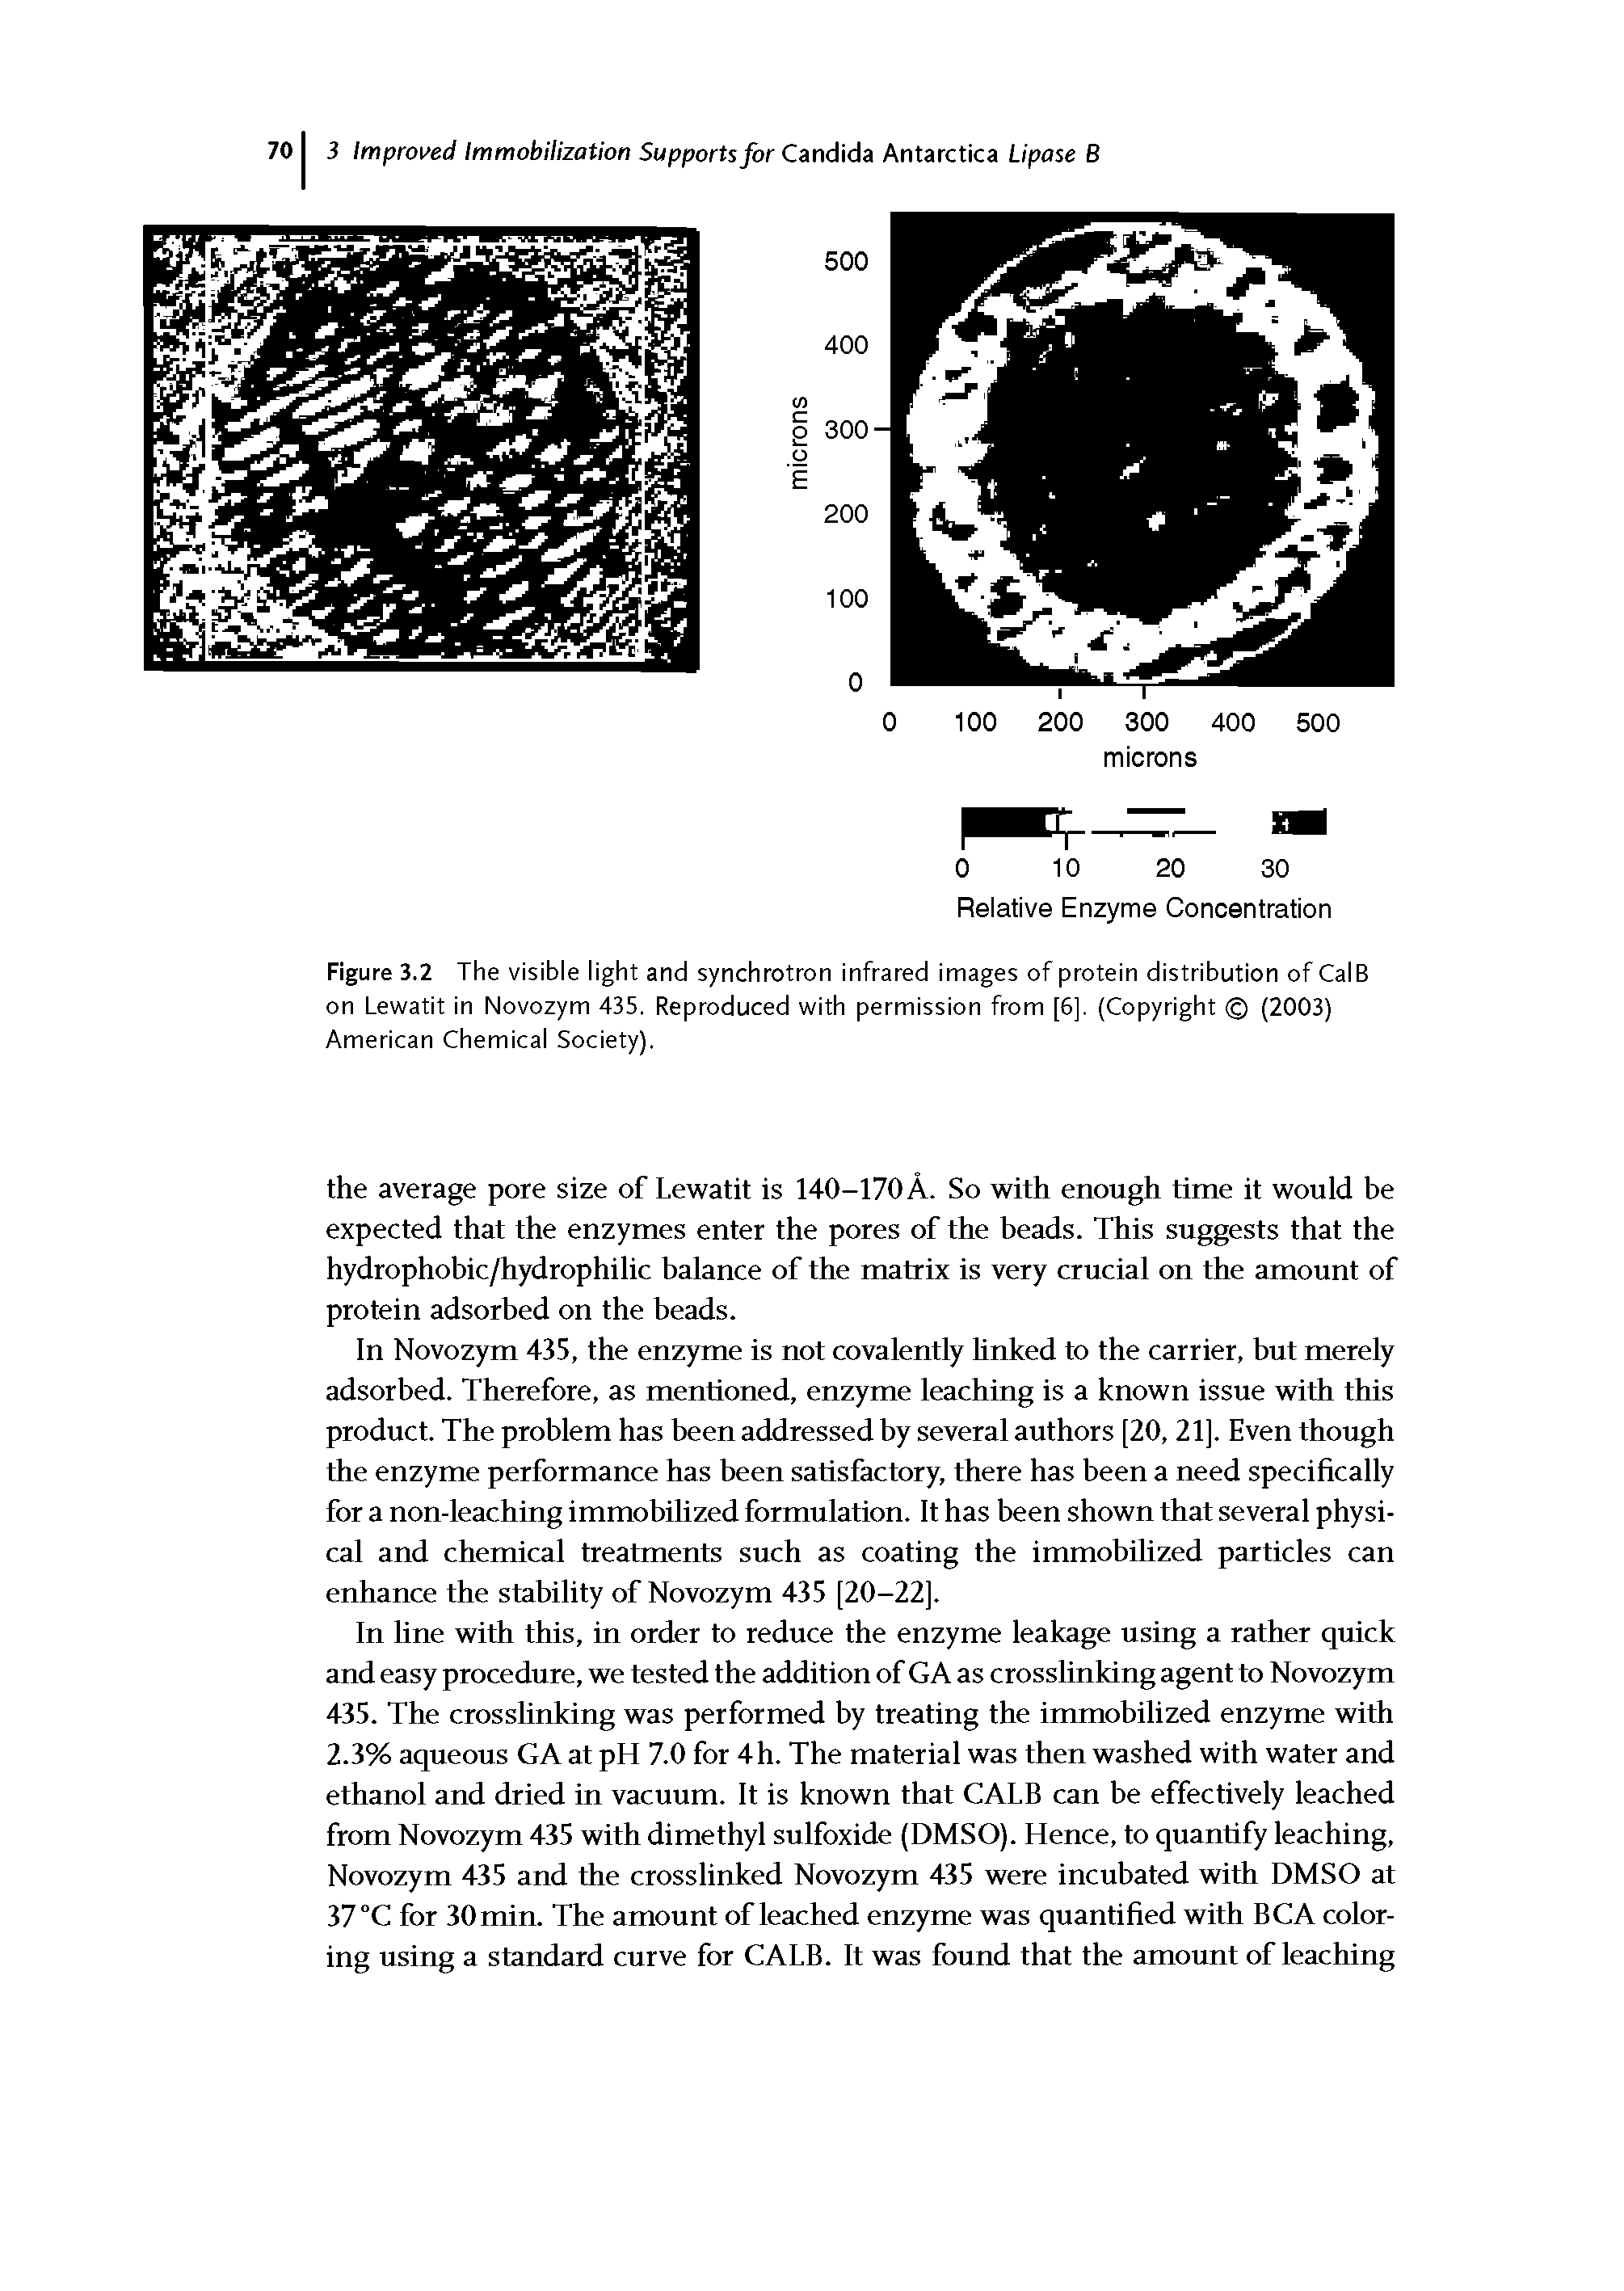 Figure 3.2 The visible light and synchrotron infrared images of protein distribution of CalB on Lewatit in Novozym 435. Reproduced with permission from [6], (Copyright (2003) American Chemical Society).